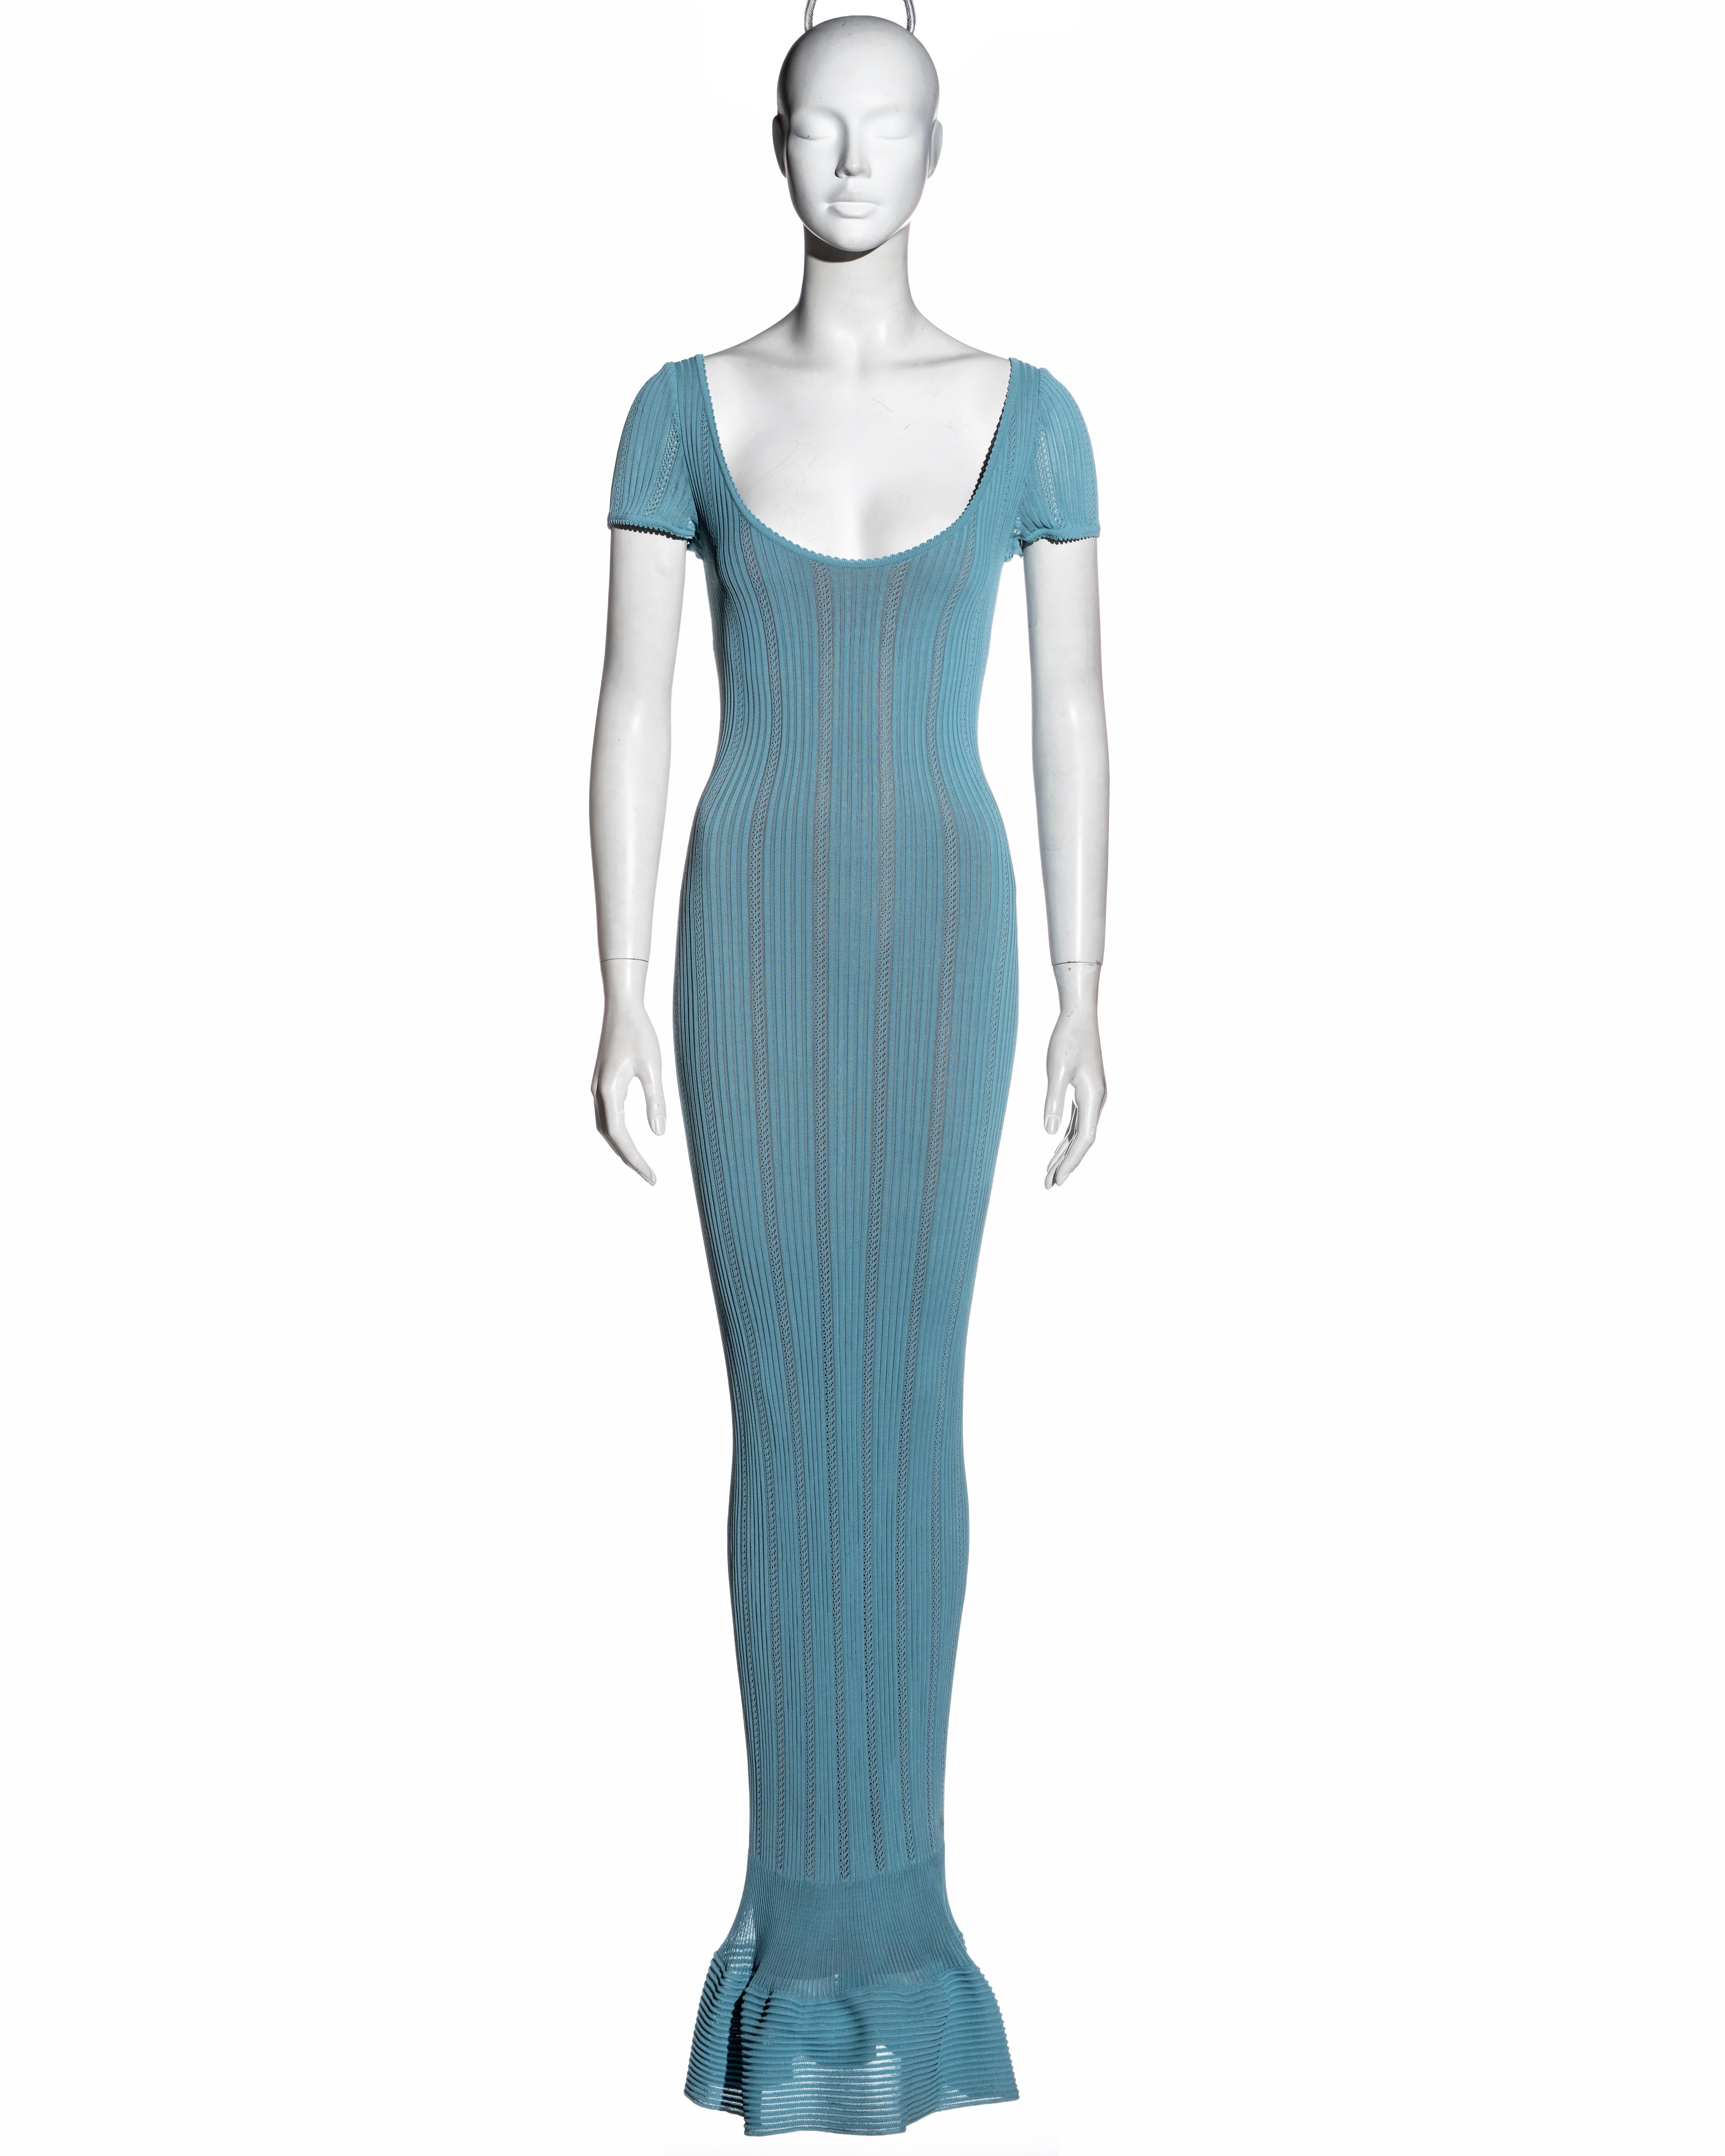 ▪ Azzedine Alaia blue rayon floor-length dress
▪ Stretch open-knit 
▪ Fishtail skirt 
▪ Figure hugging fit 
▪ Nude lining 
▪ Size 'S'
▪ Spring-Summer 1996
▪ 100% Rayon
▪ Made in Italy